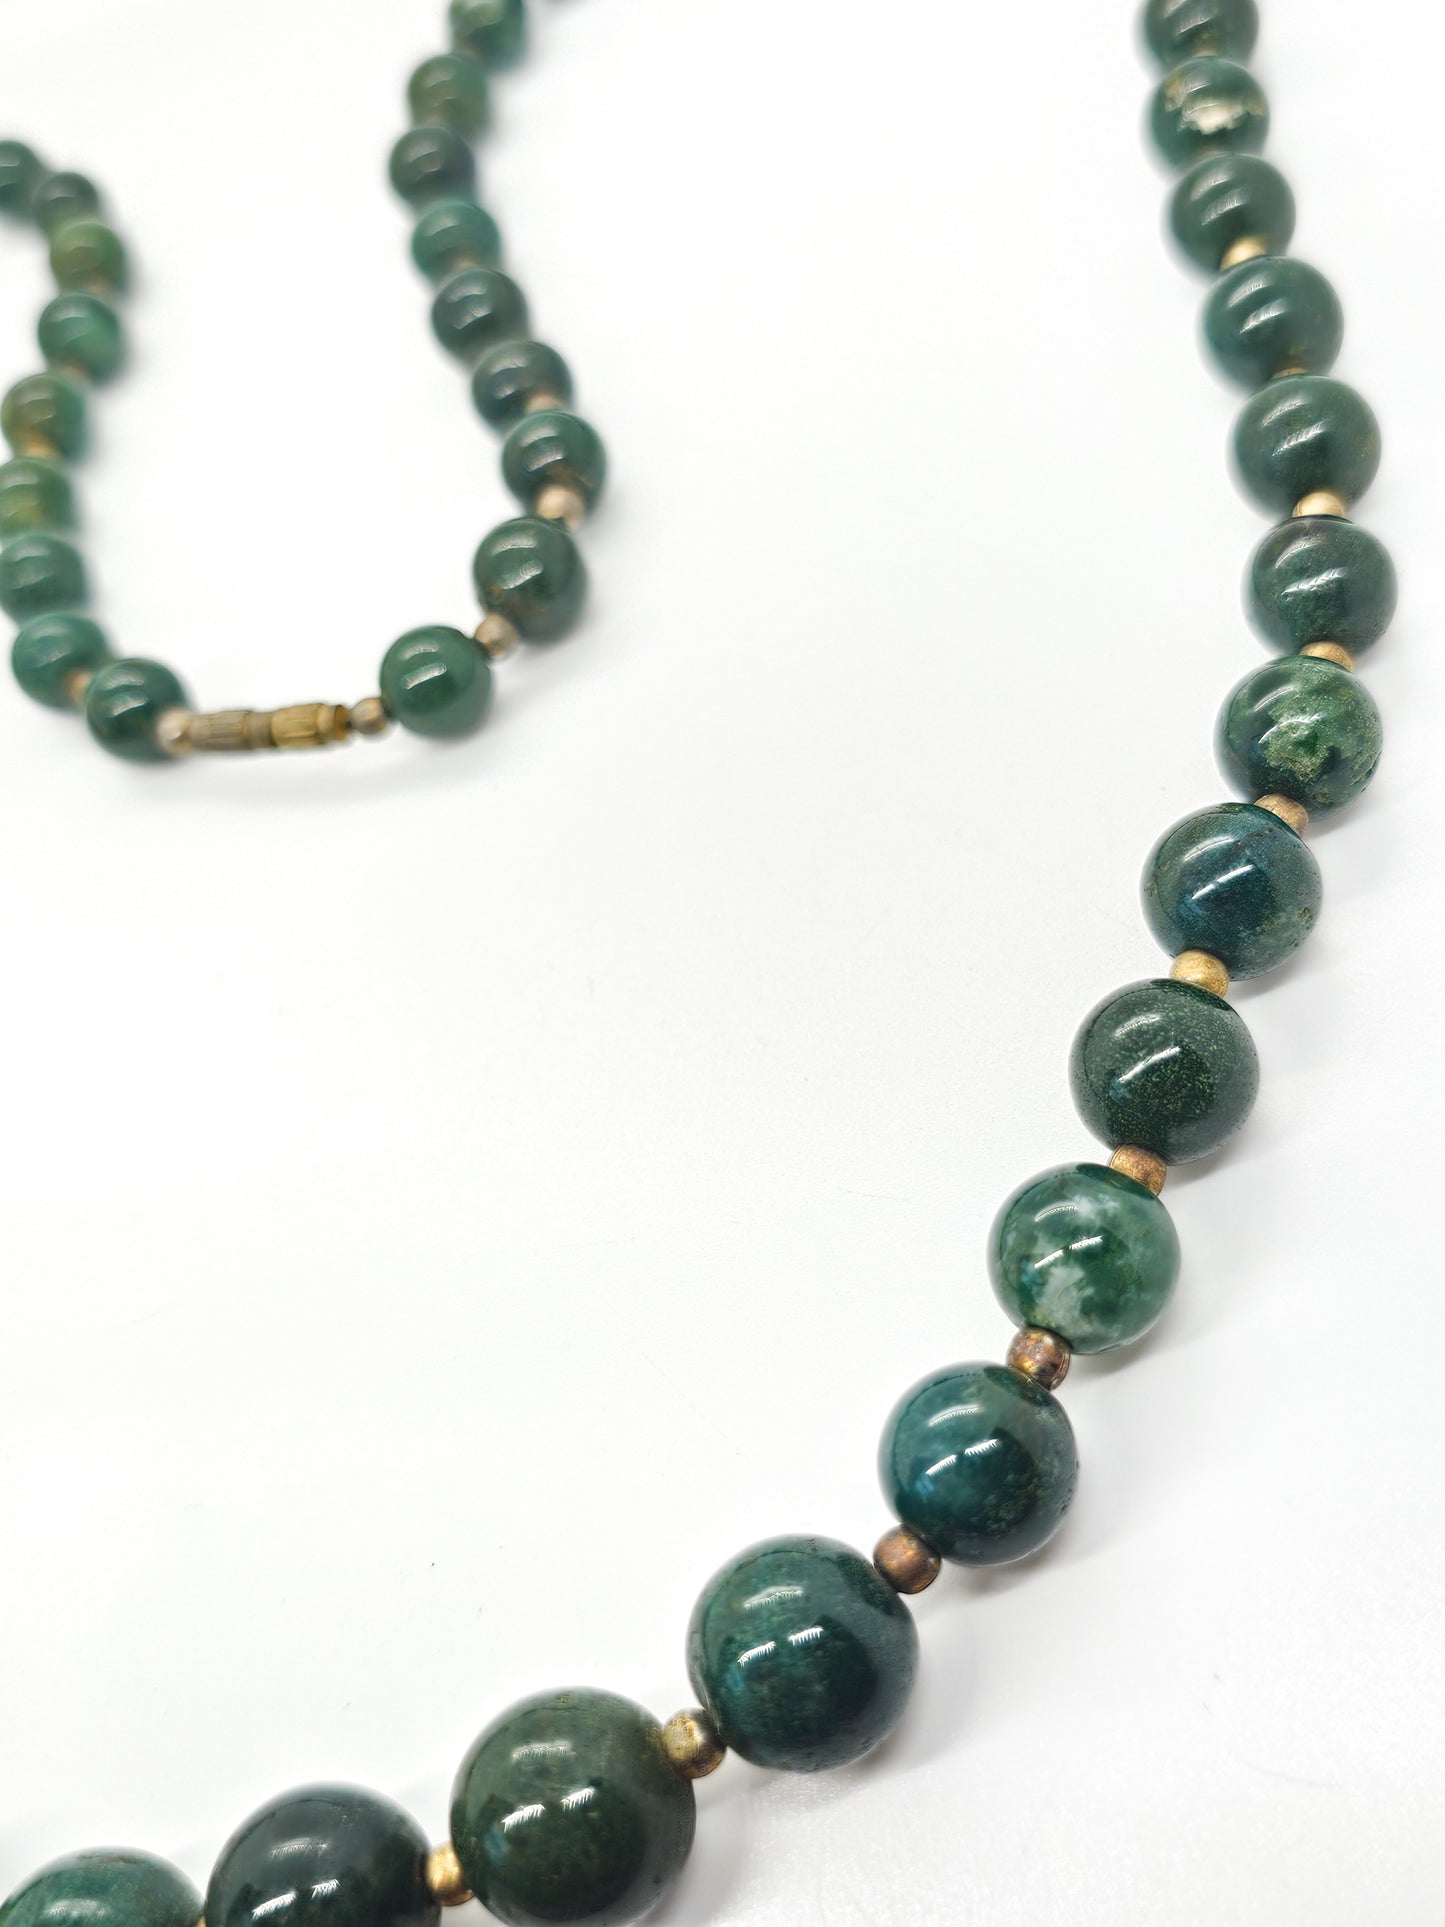 Moss Agate Deep Green graduated long 30" inch vintage beaded necklace